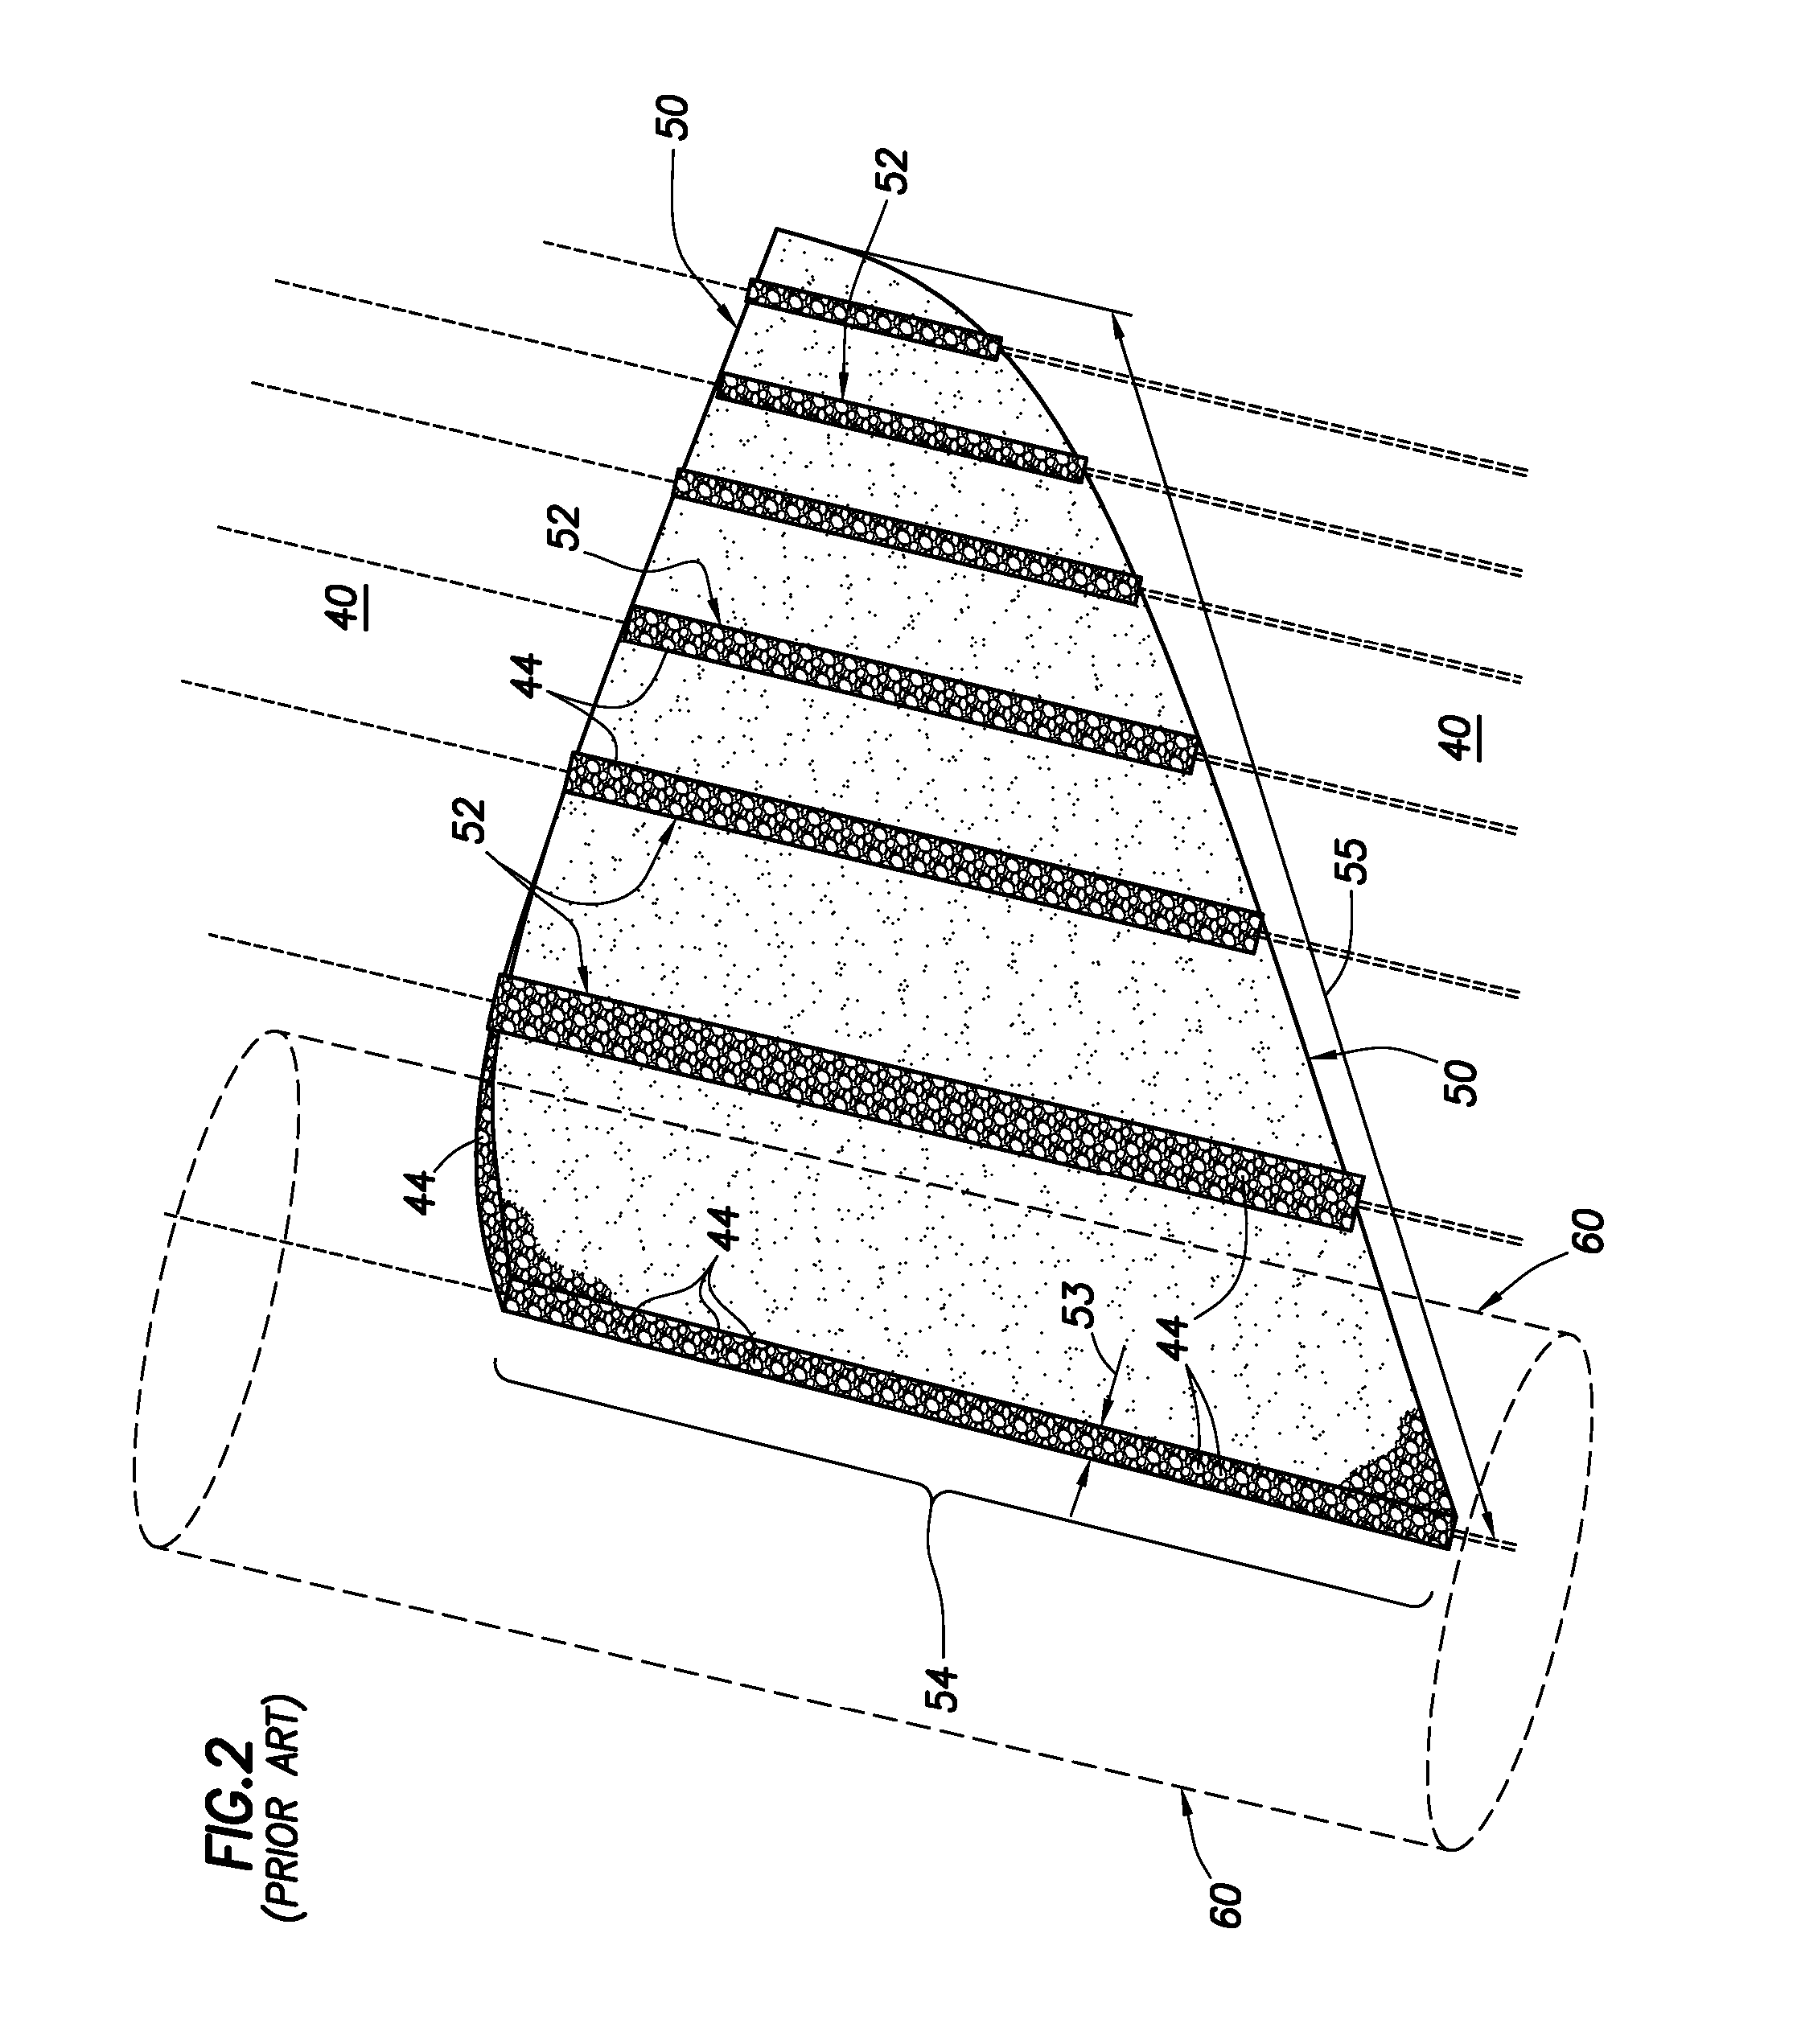 Method and apparatus for generating seismic pulses to map subterranean fractures